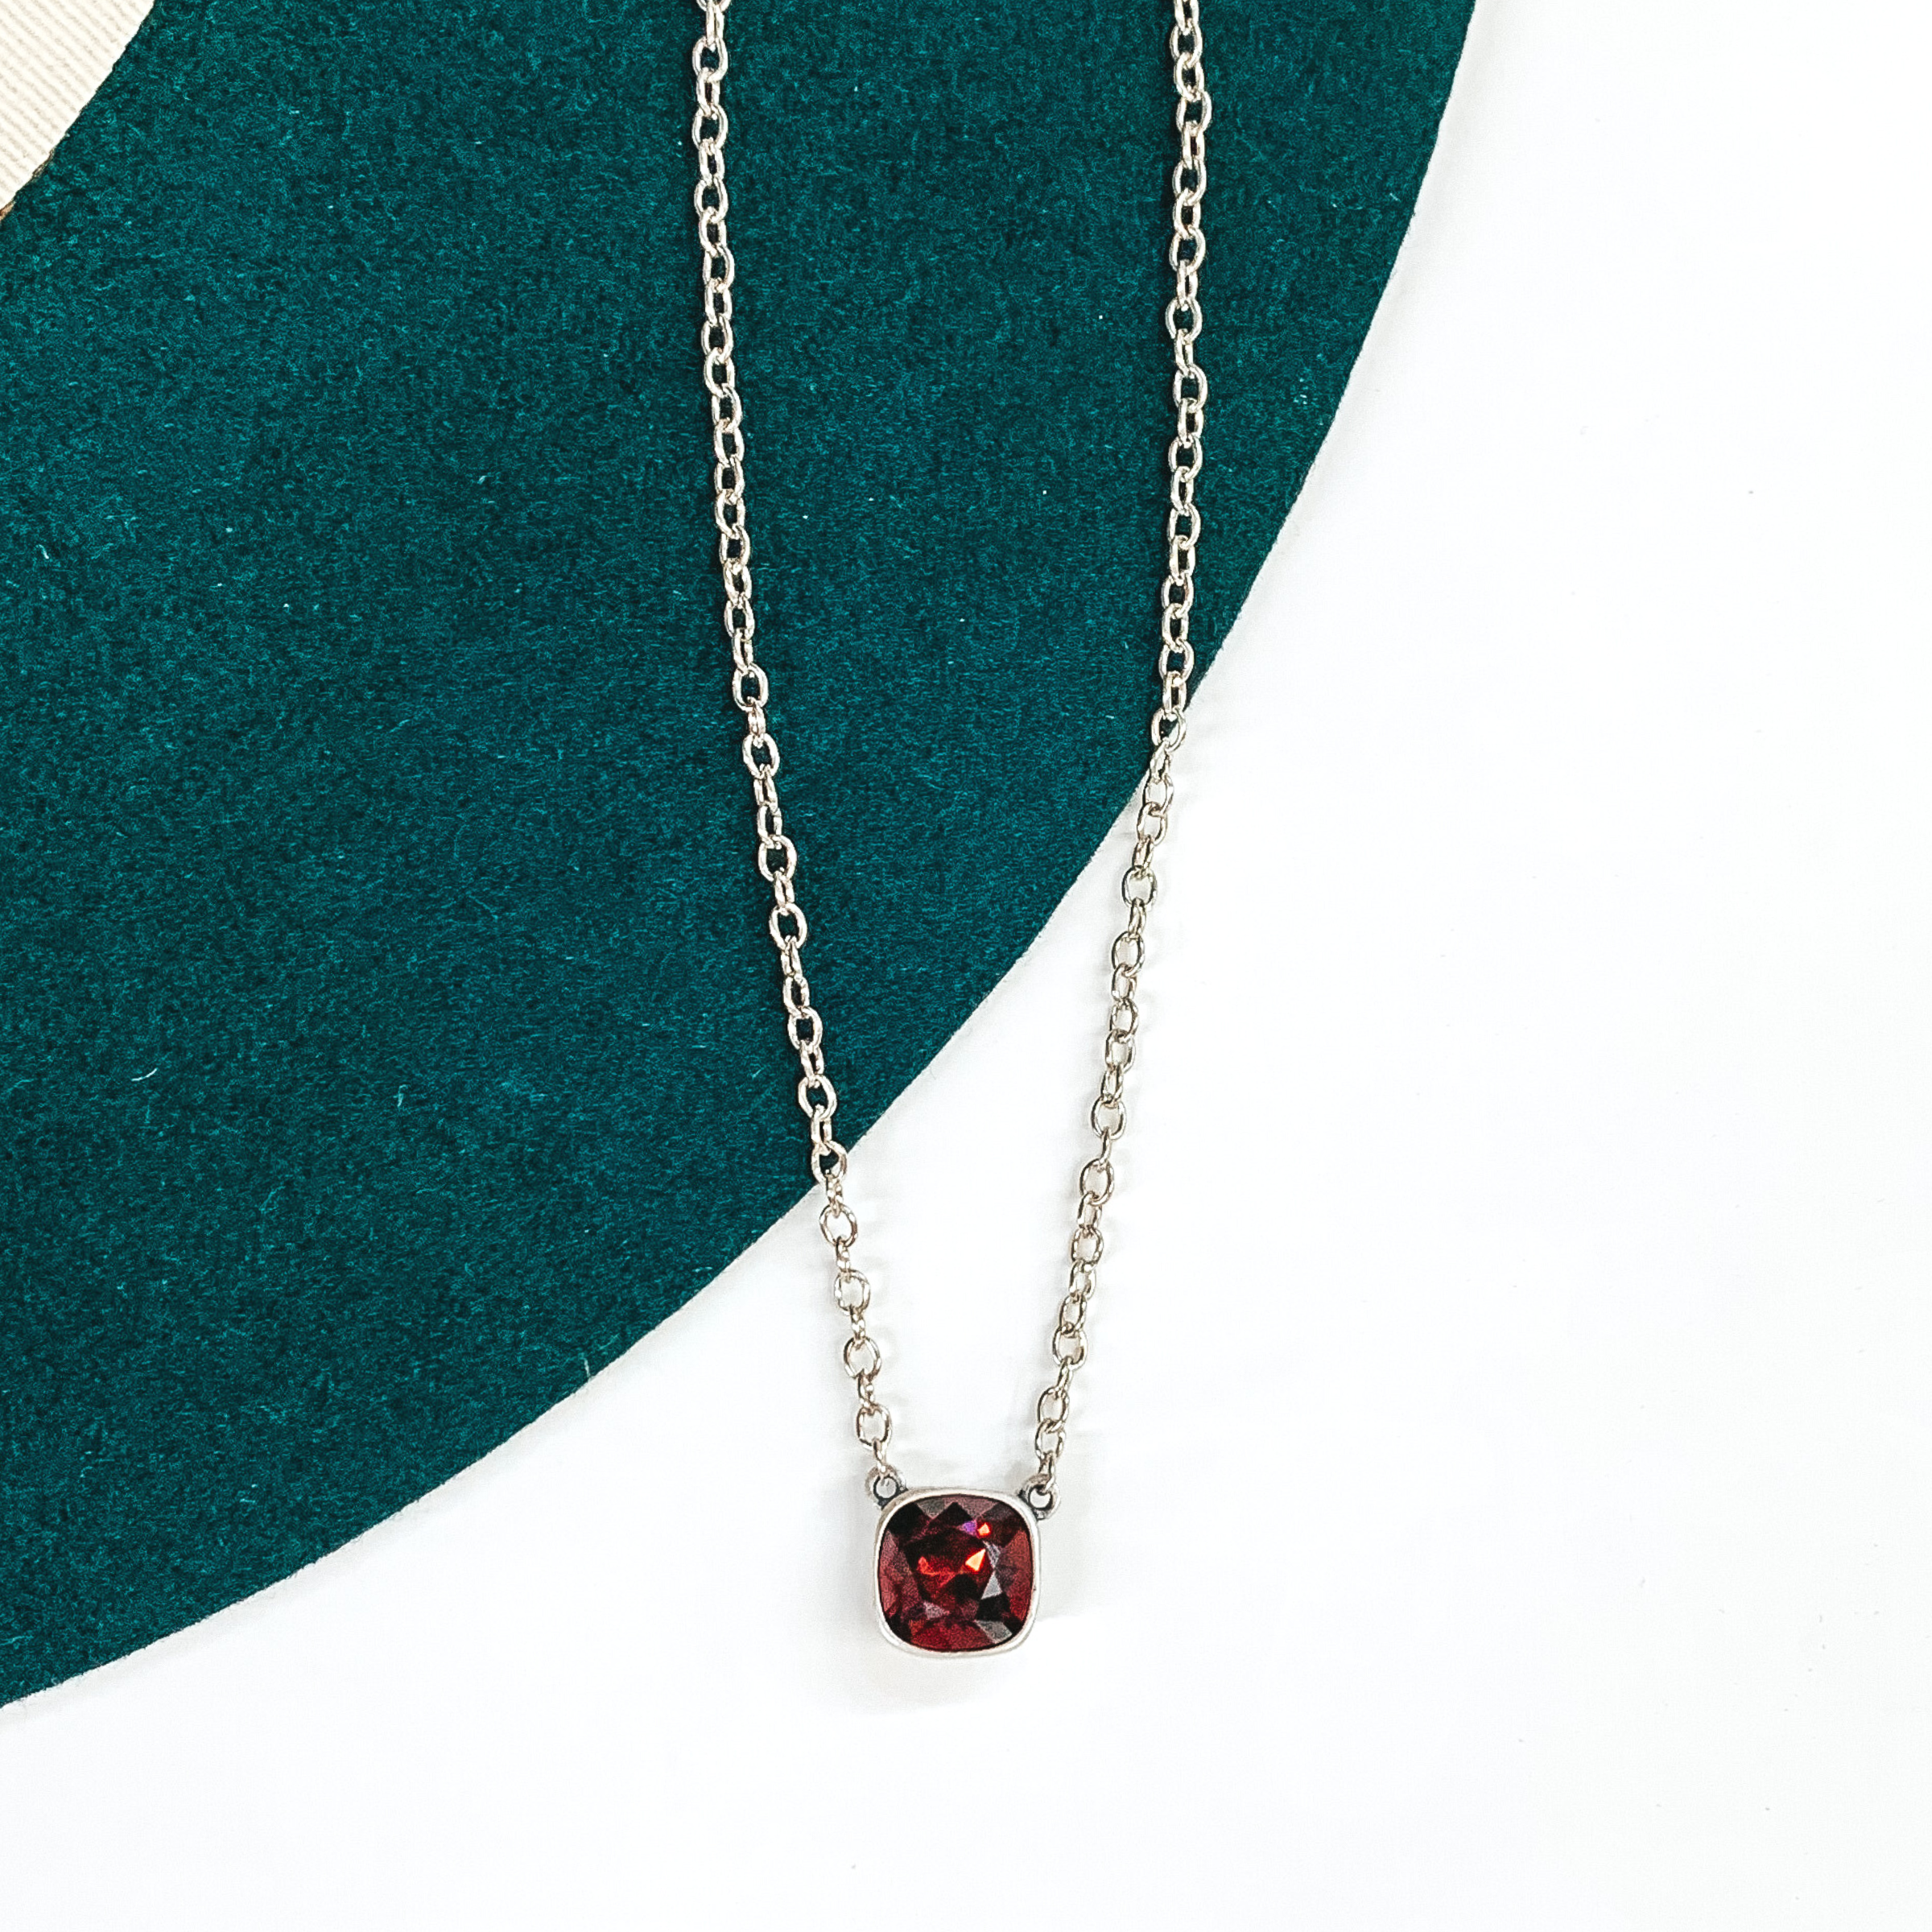 Silver chained necklace with a single maroon crystal. This necklace is pictured on a white and green background.